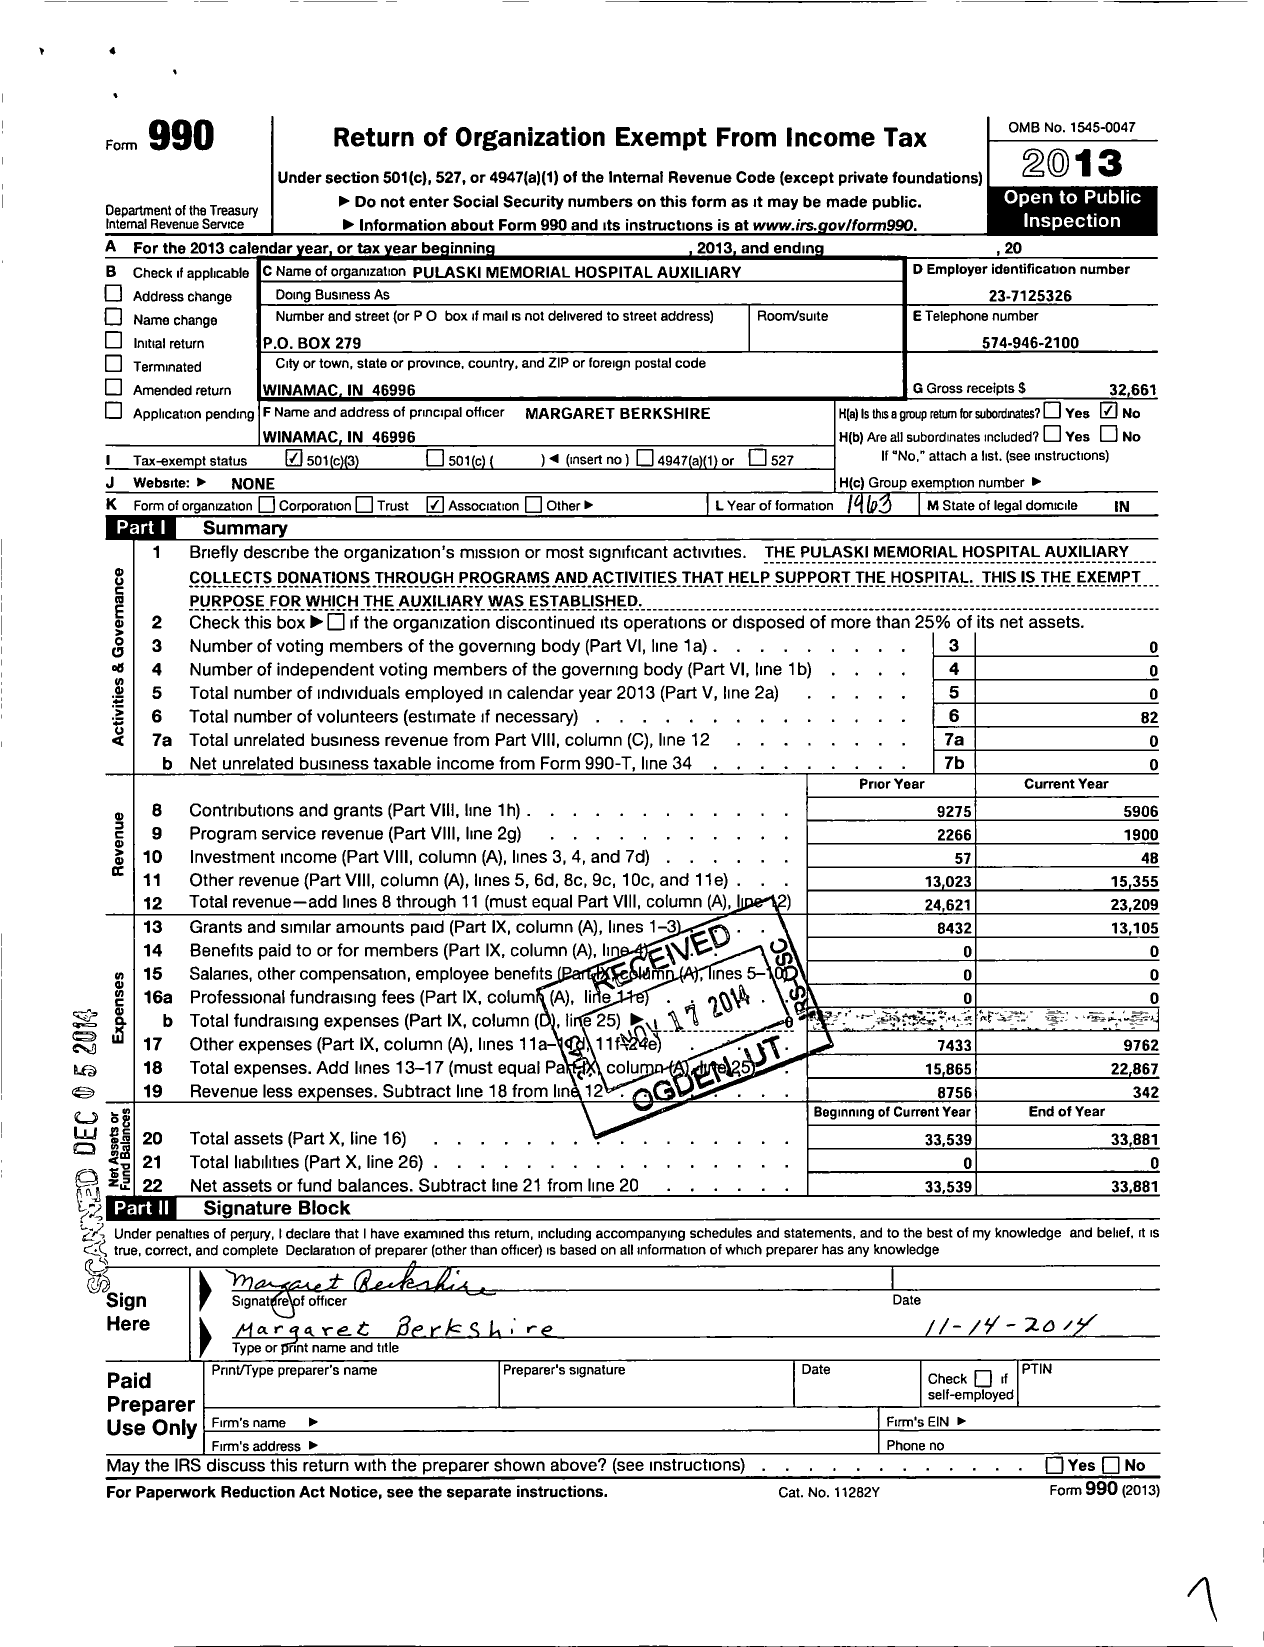 Image of first page of 2013 Form 990 for Pulaski Memorial Hospital Auxiliary